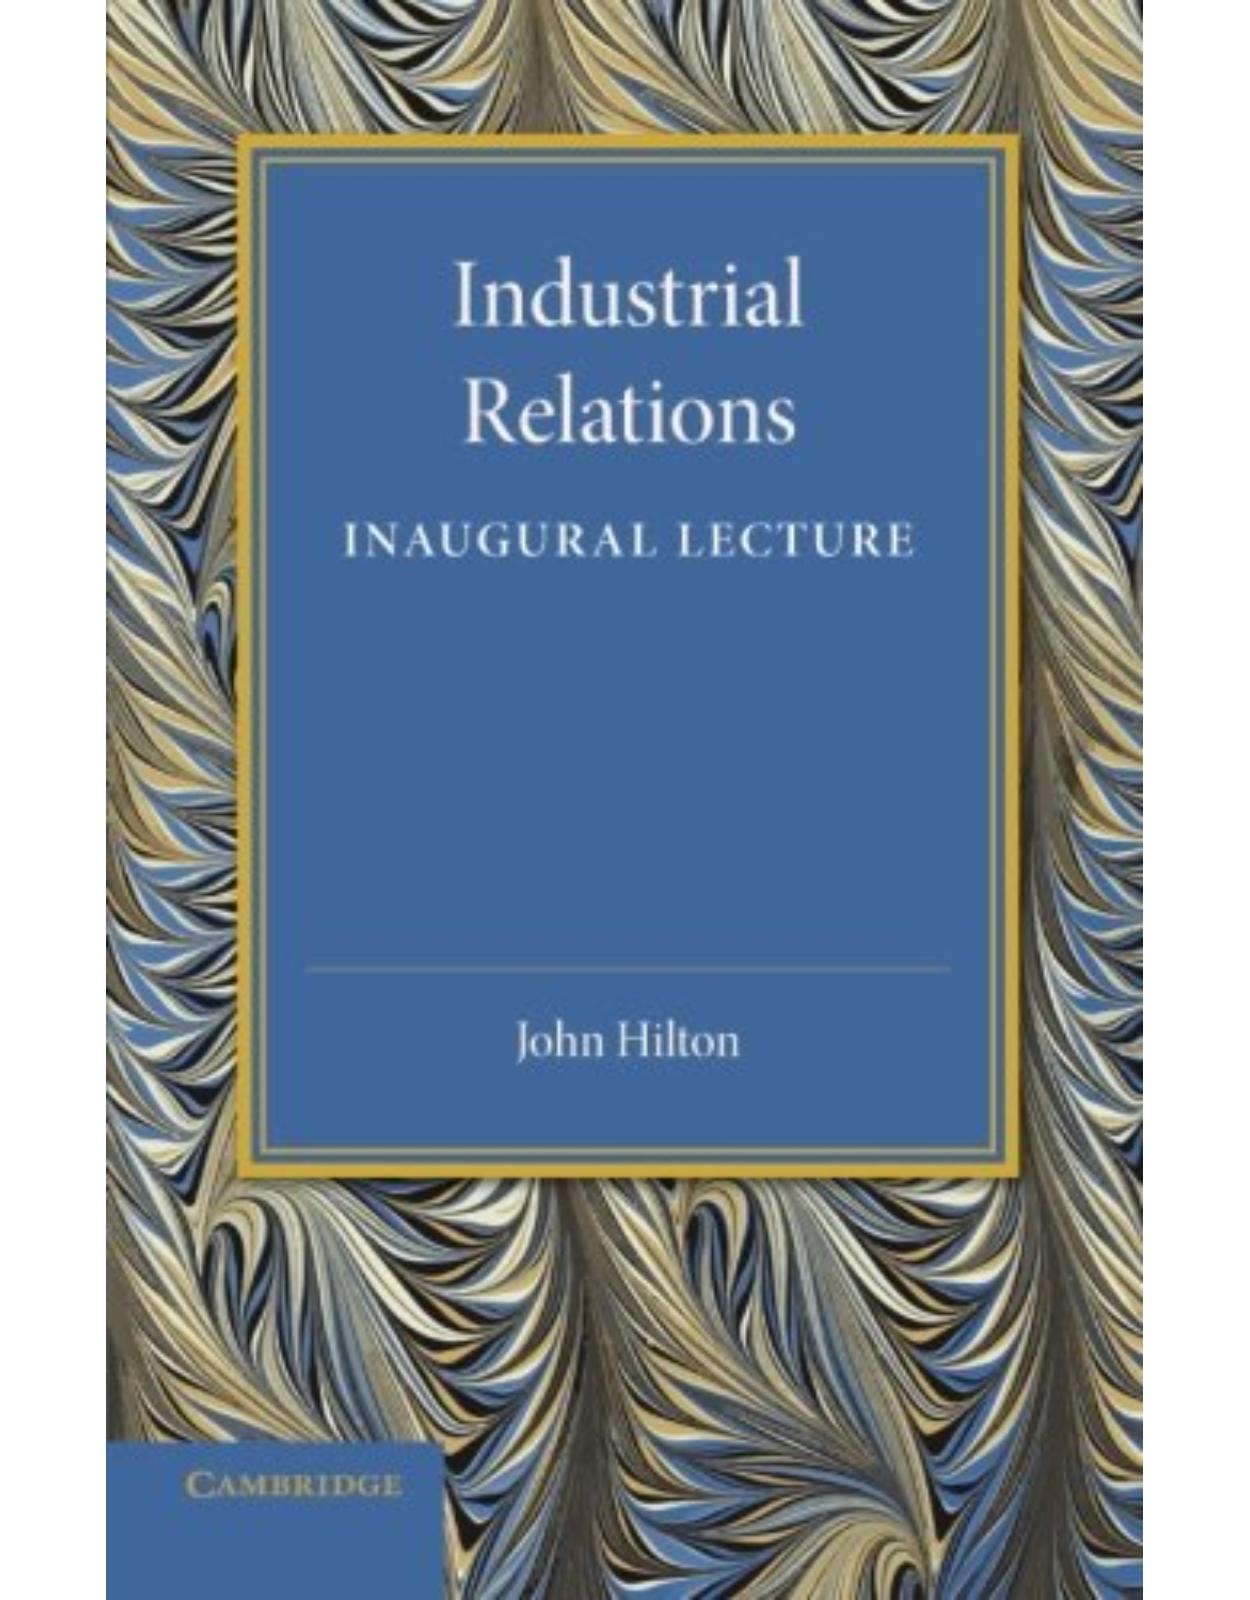 Industrial Relations: An Inaugural Lecture